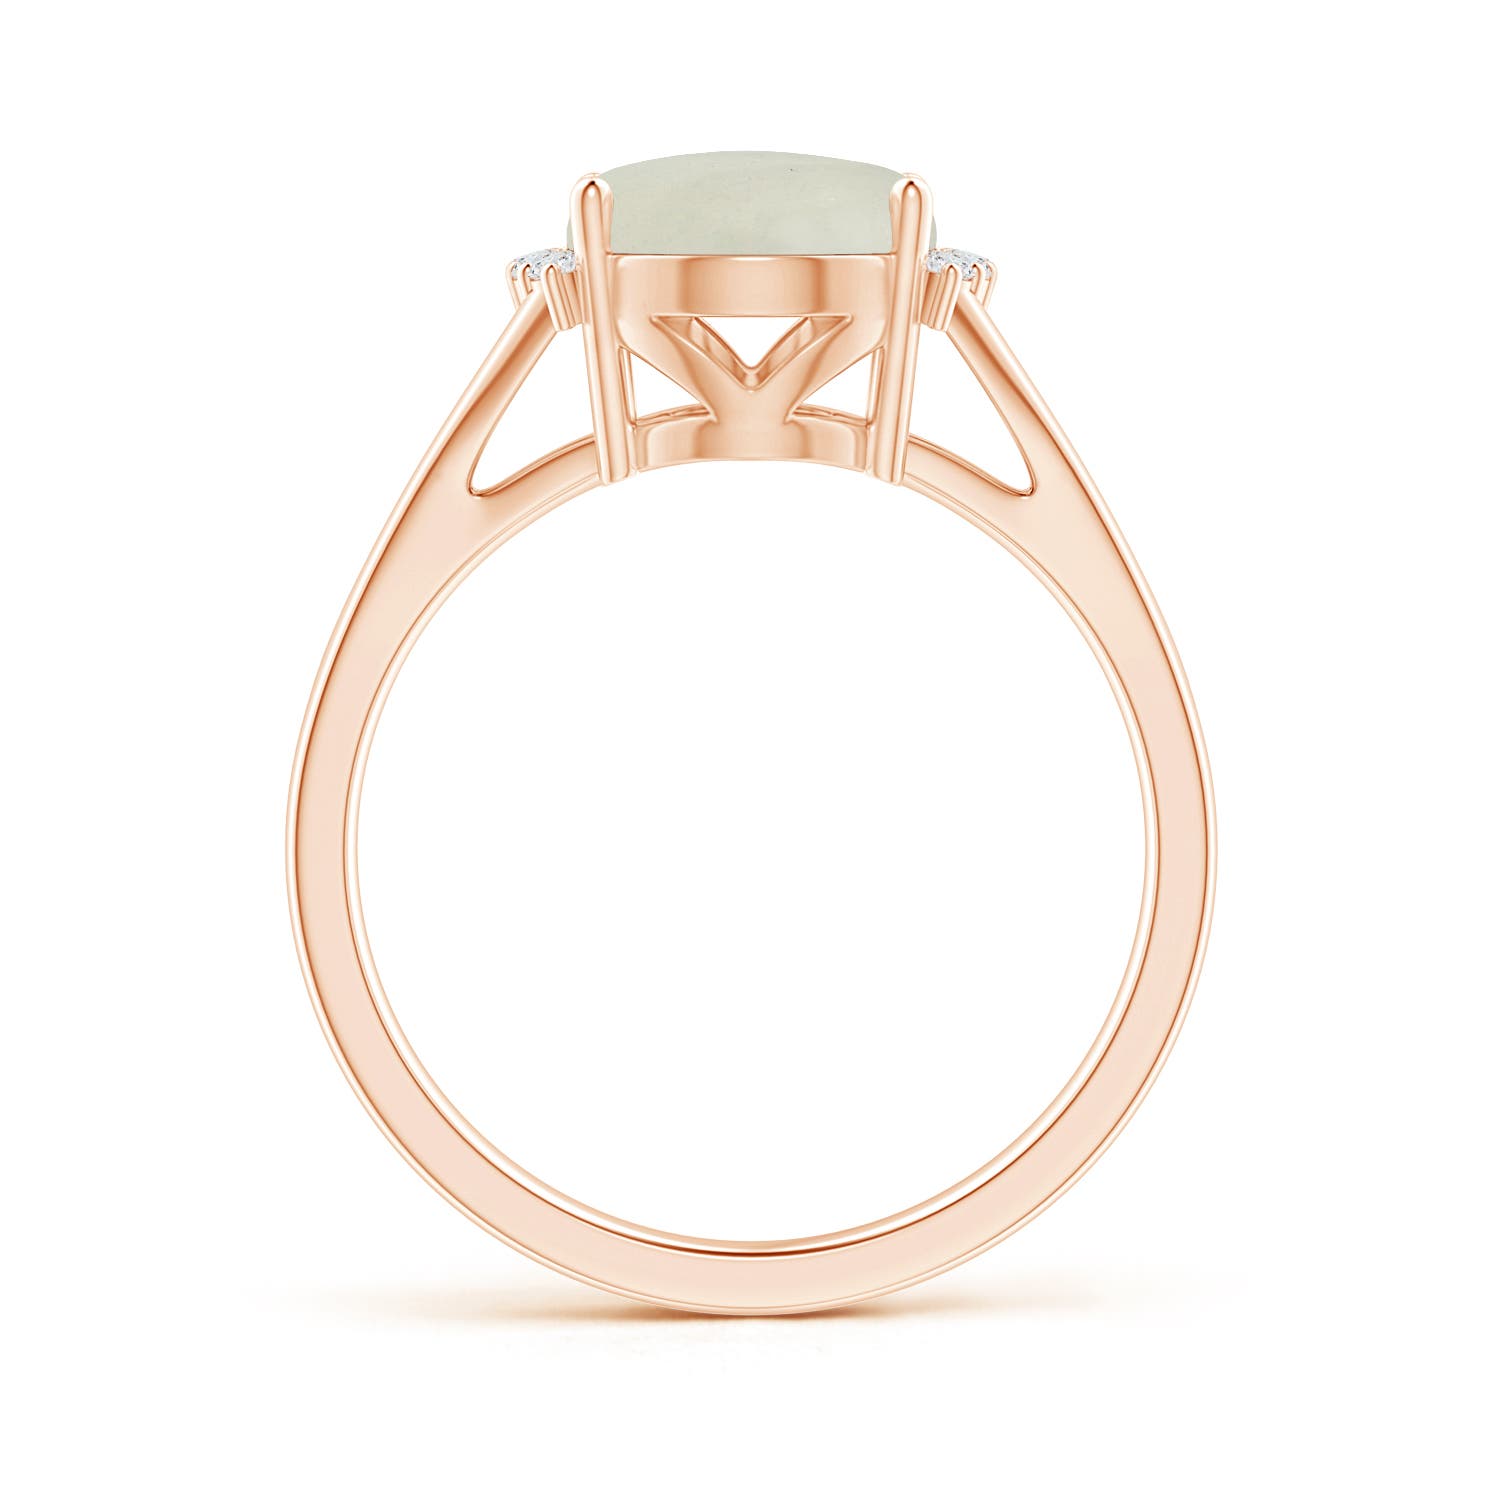 AA - Moonstone / 2.6 CT / 14 KT Rose Gold